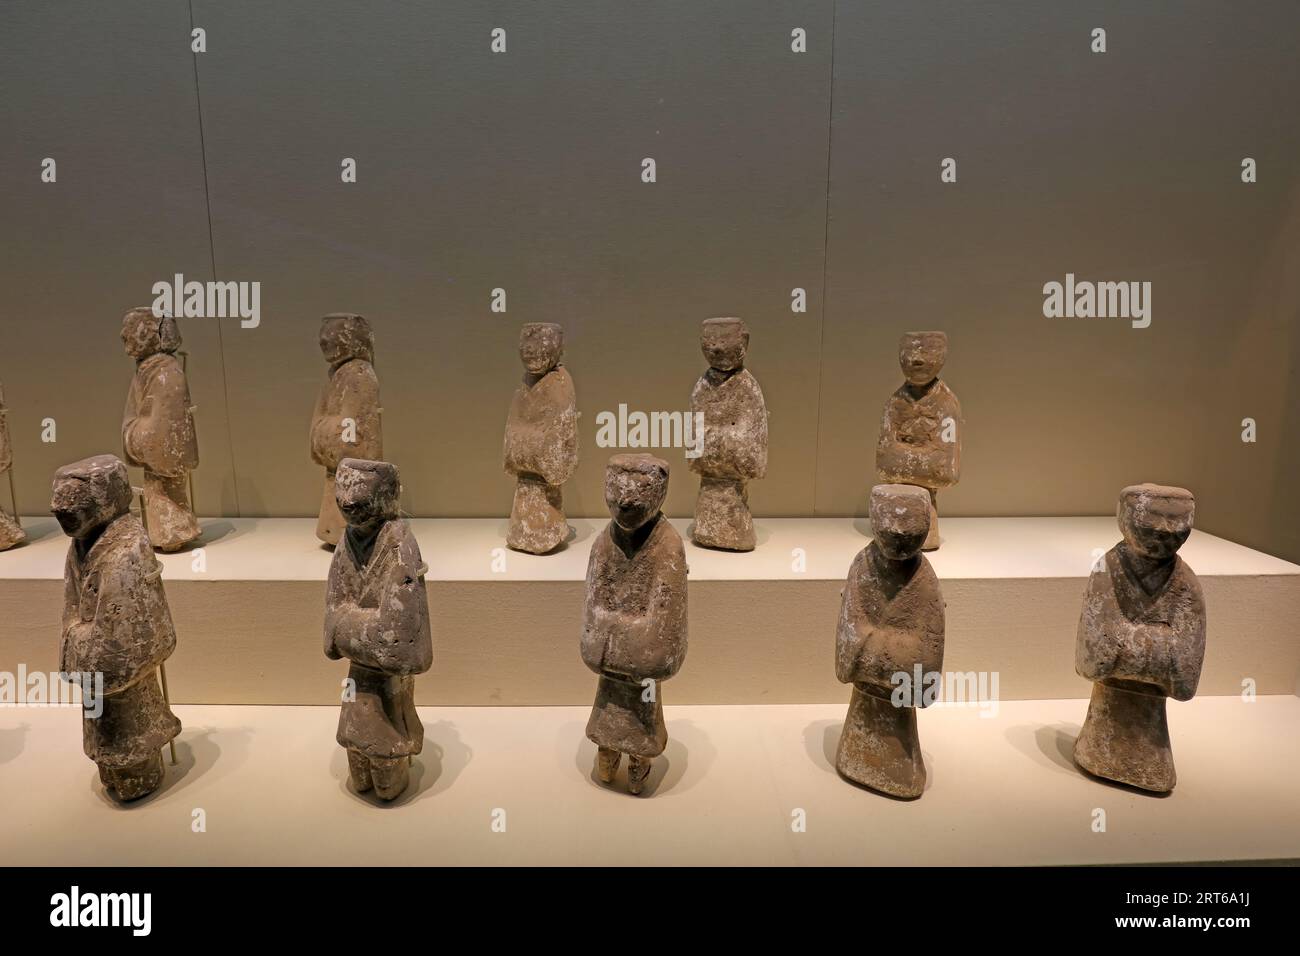 Chinese ancient ceramic figure sculpture, unearthed cultural relics Stock Photo